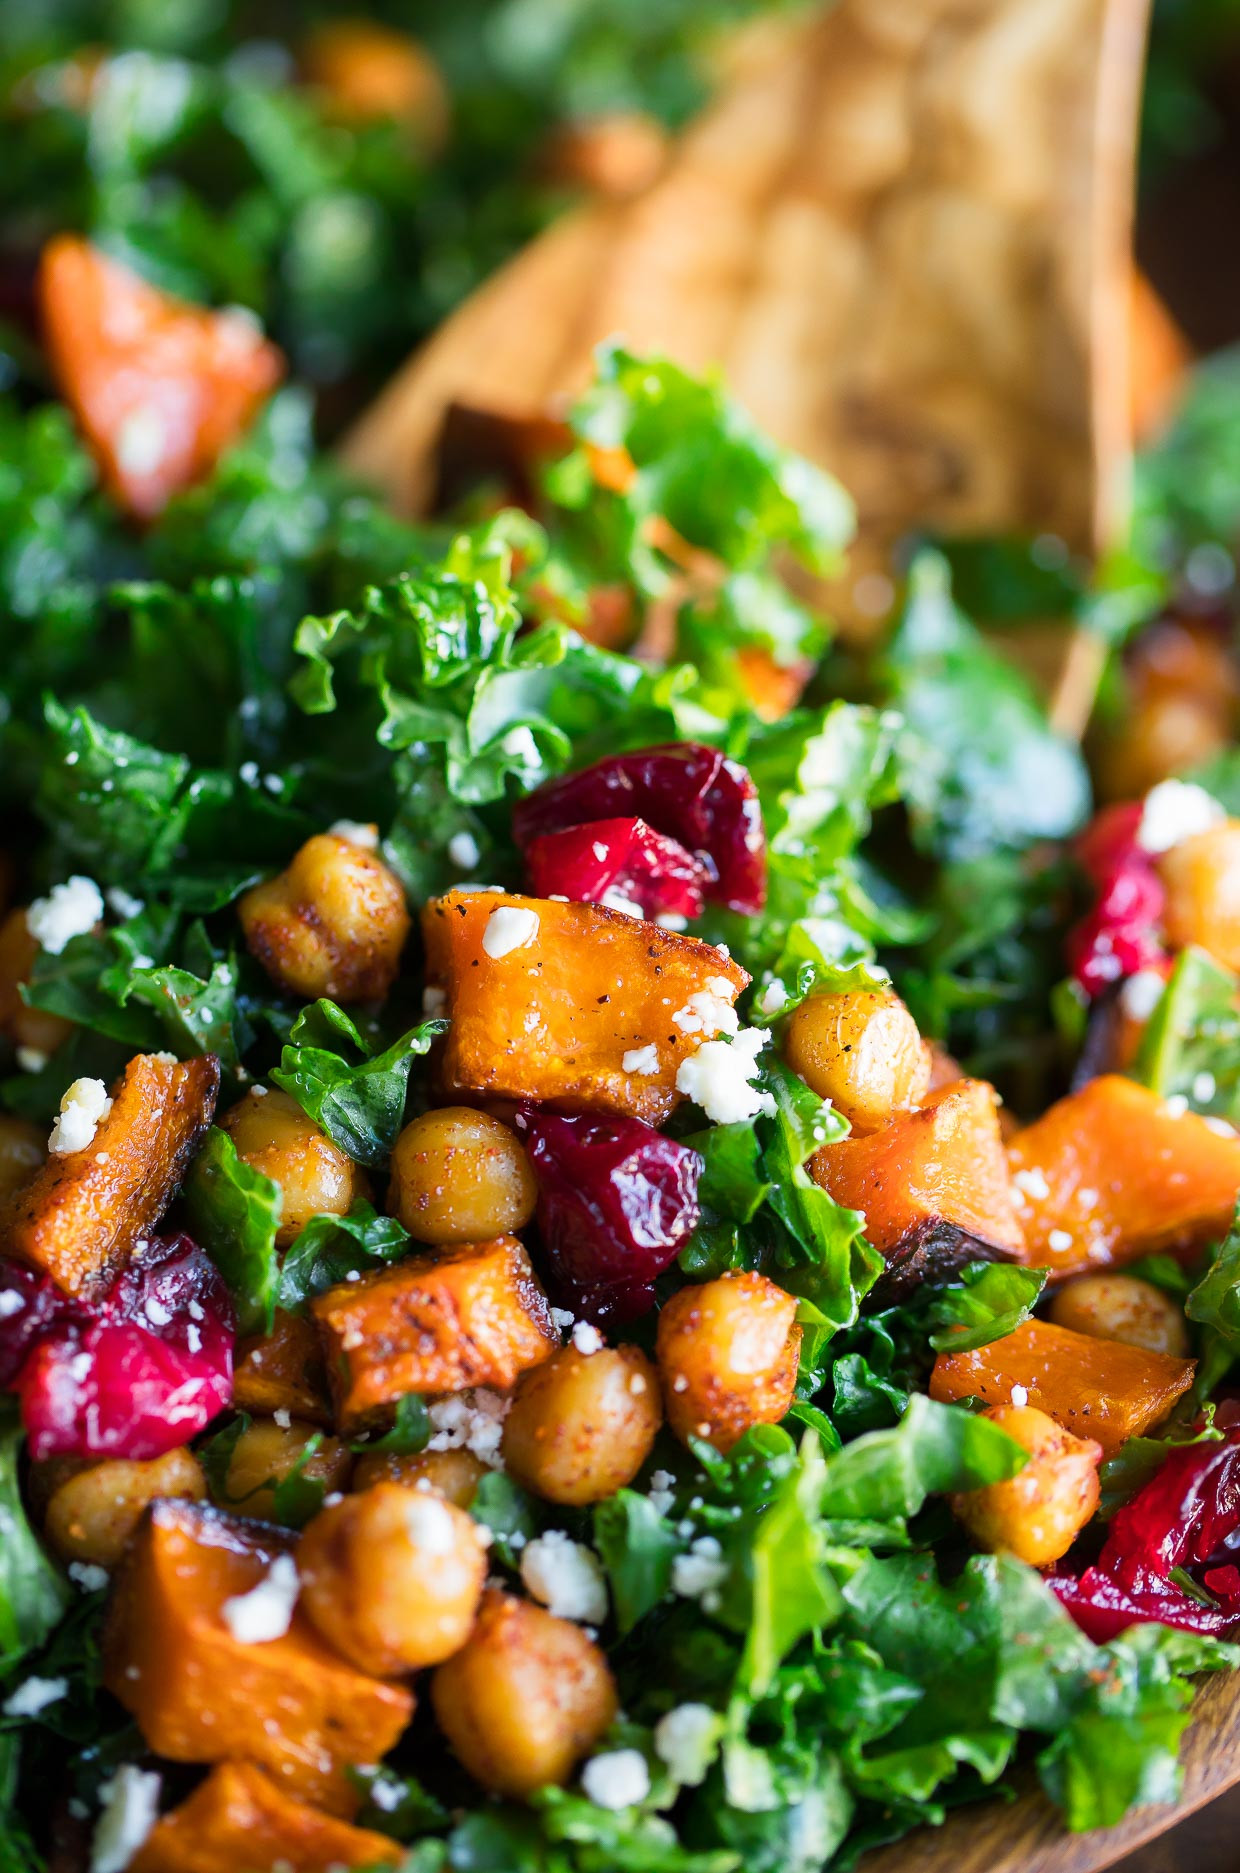 Roasted Butternut Squash Salad
 Roasted Butternut Squash Kale Salad with Chickpeas and